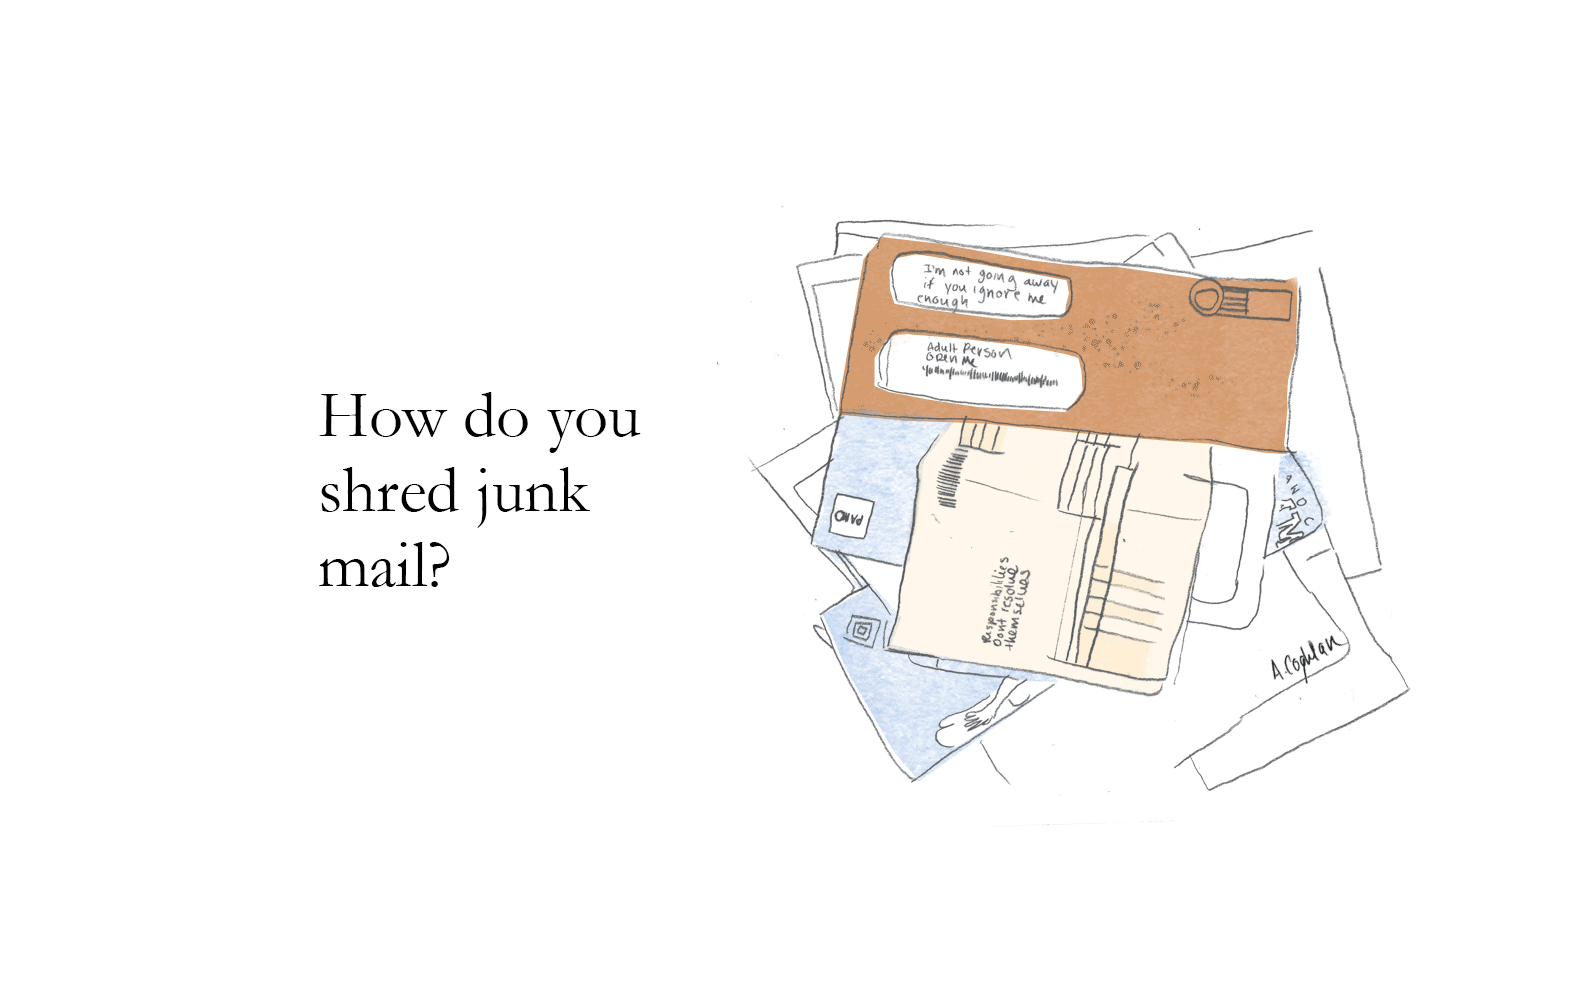 An illustration of a pile of mail with accompanying text that asks “How do you shred junk mail?: